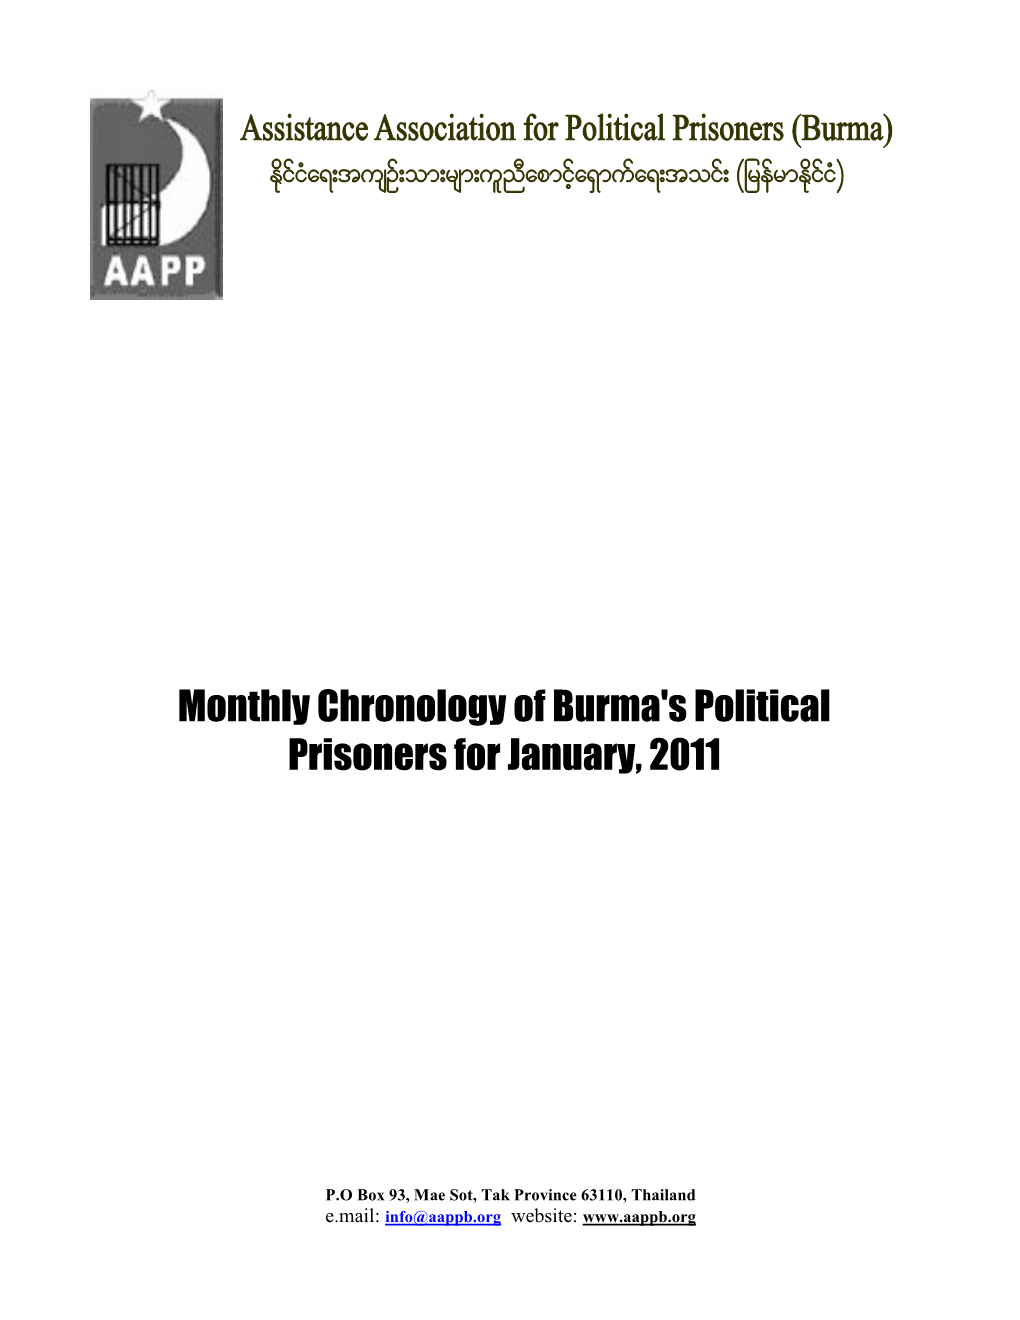 Monthly Chronology of Burma's Political Prisoners for January, 2011